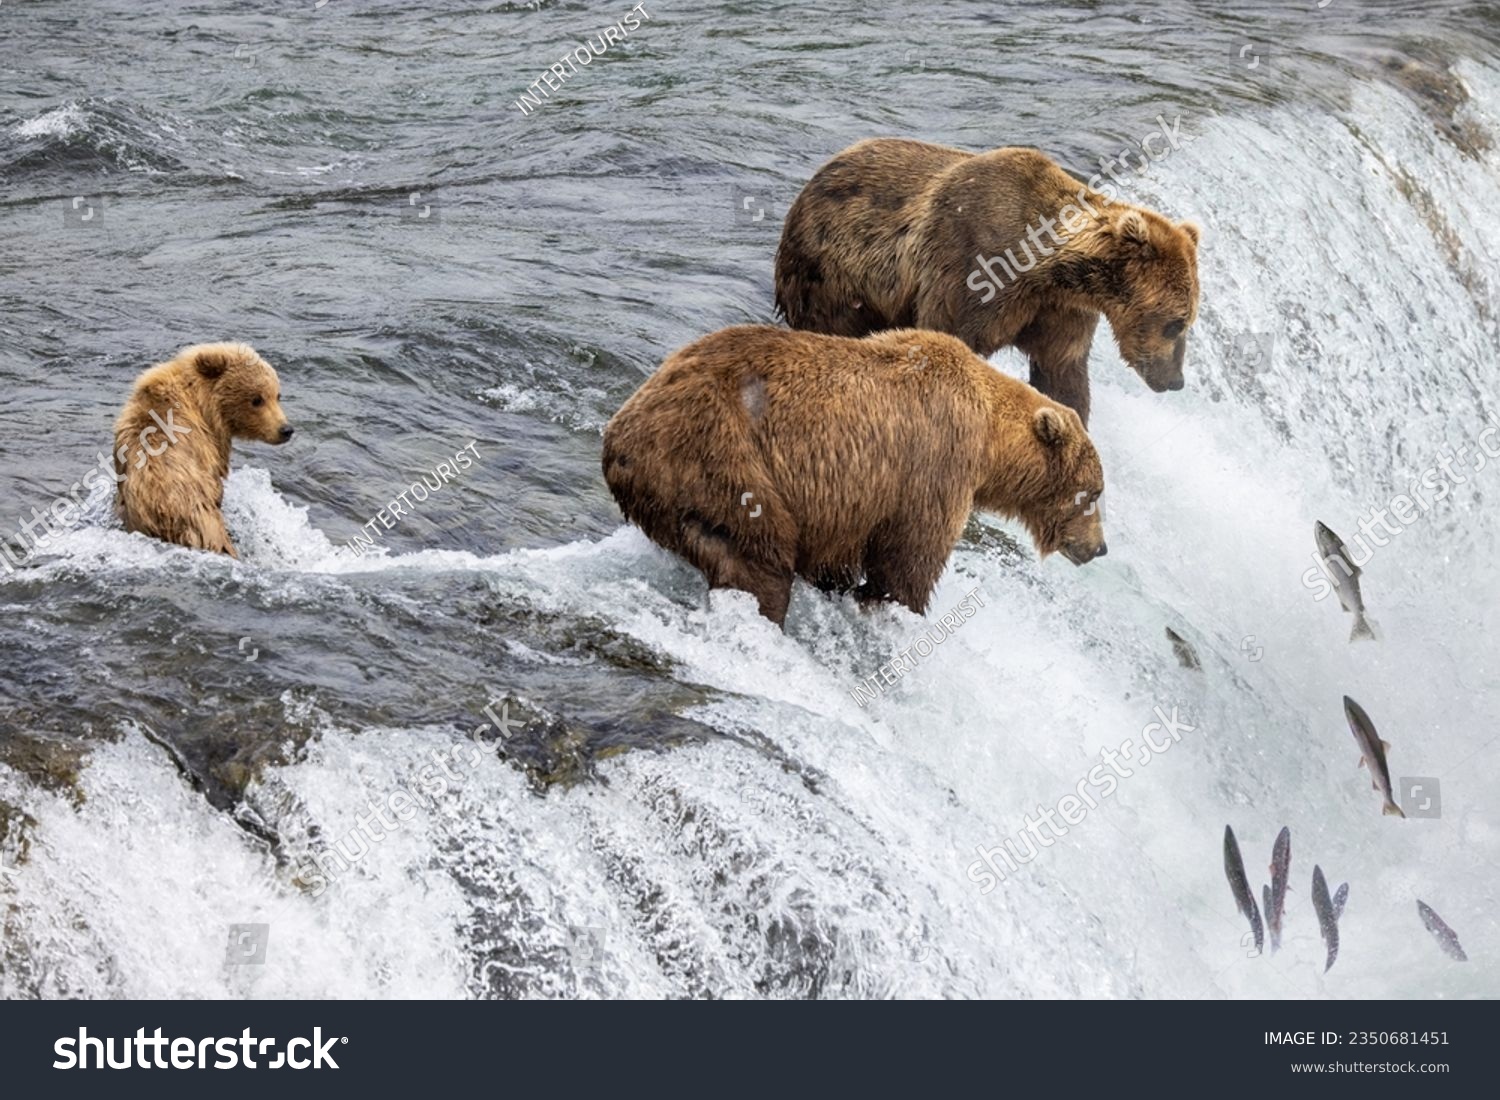 brown bears stand on the edge of Brooks Falls waiting for salmon to jump up the falls. #2350681451